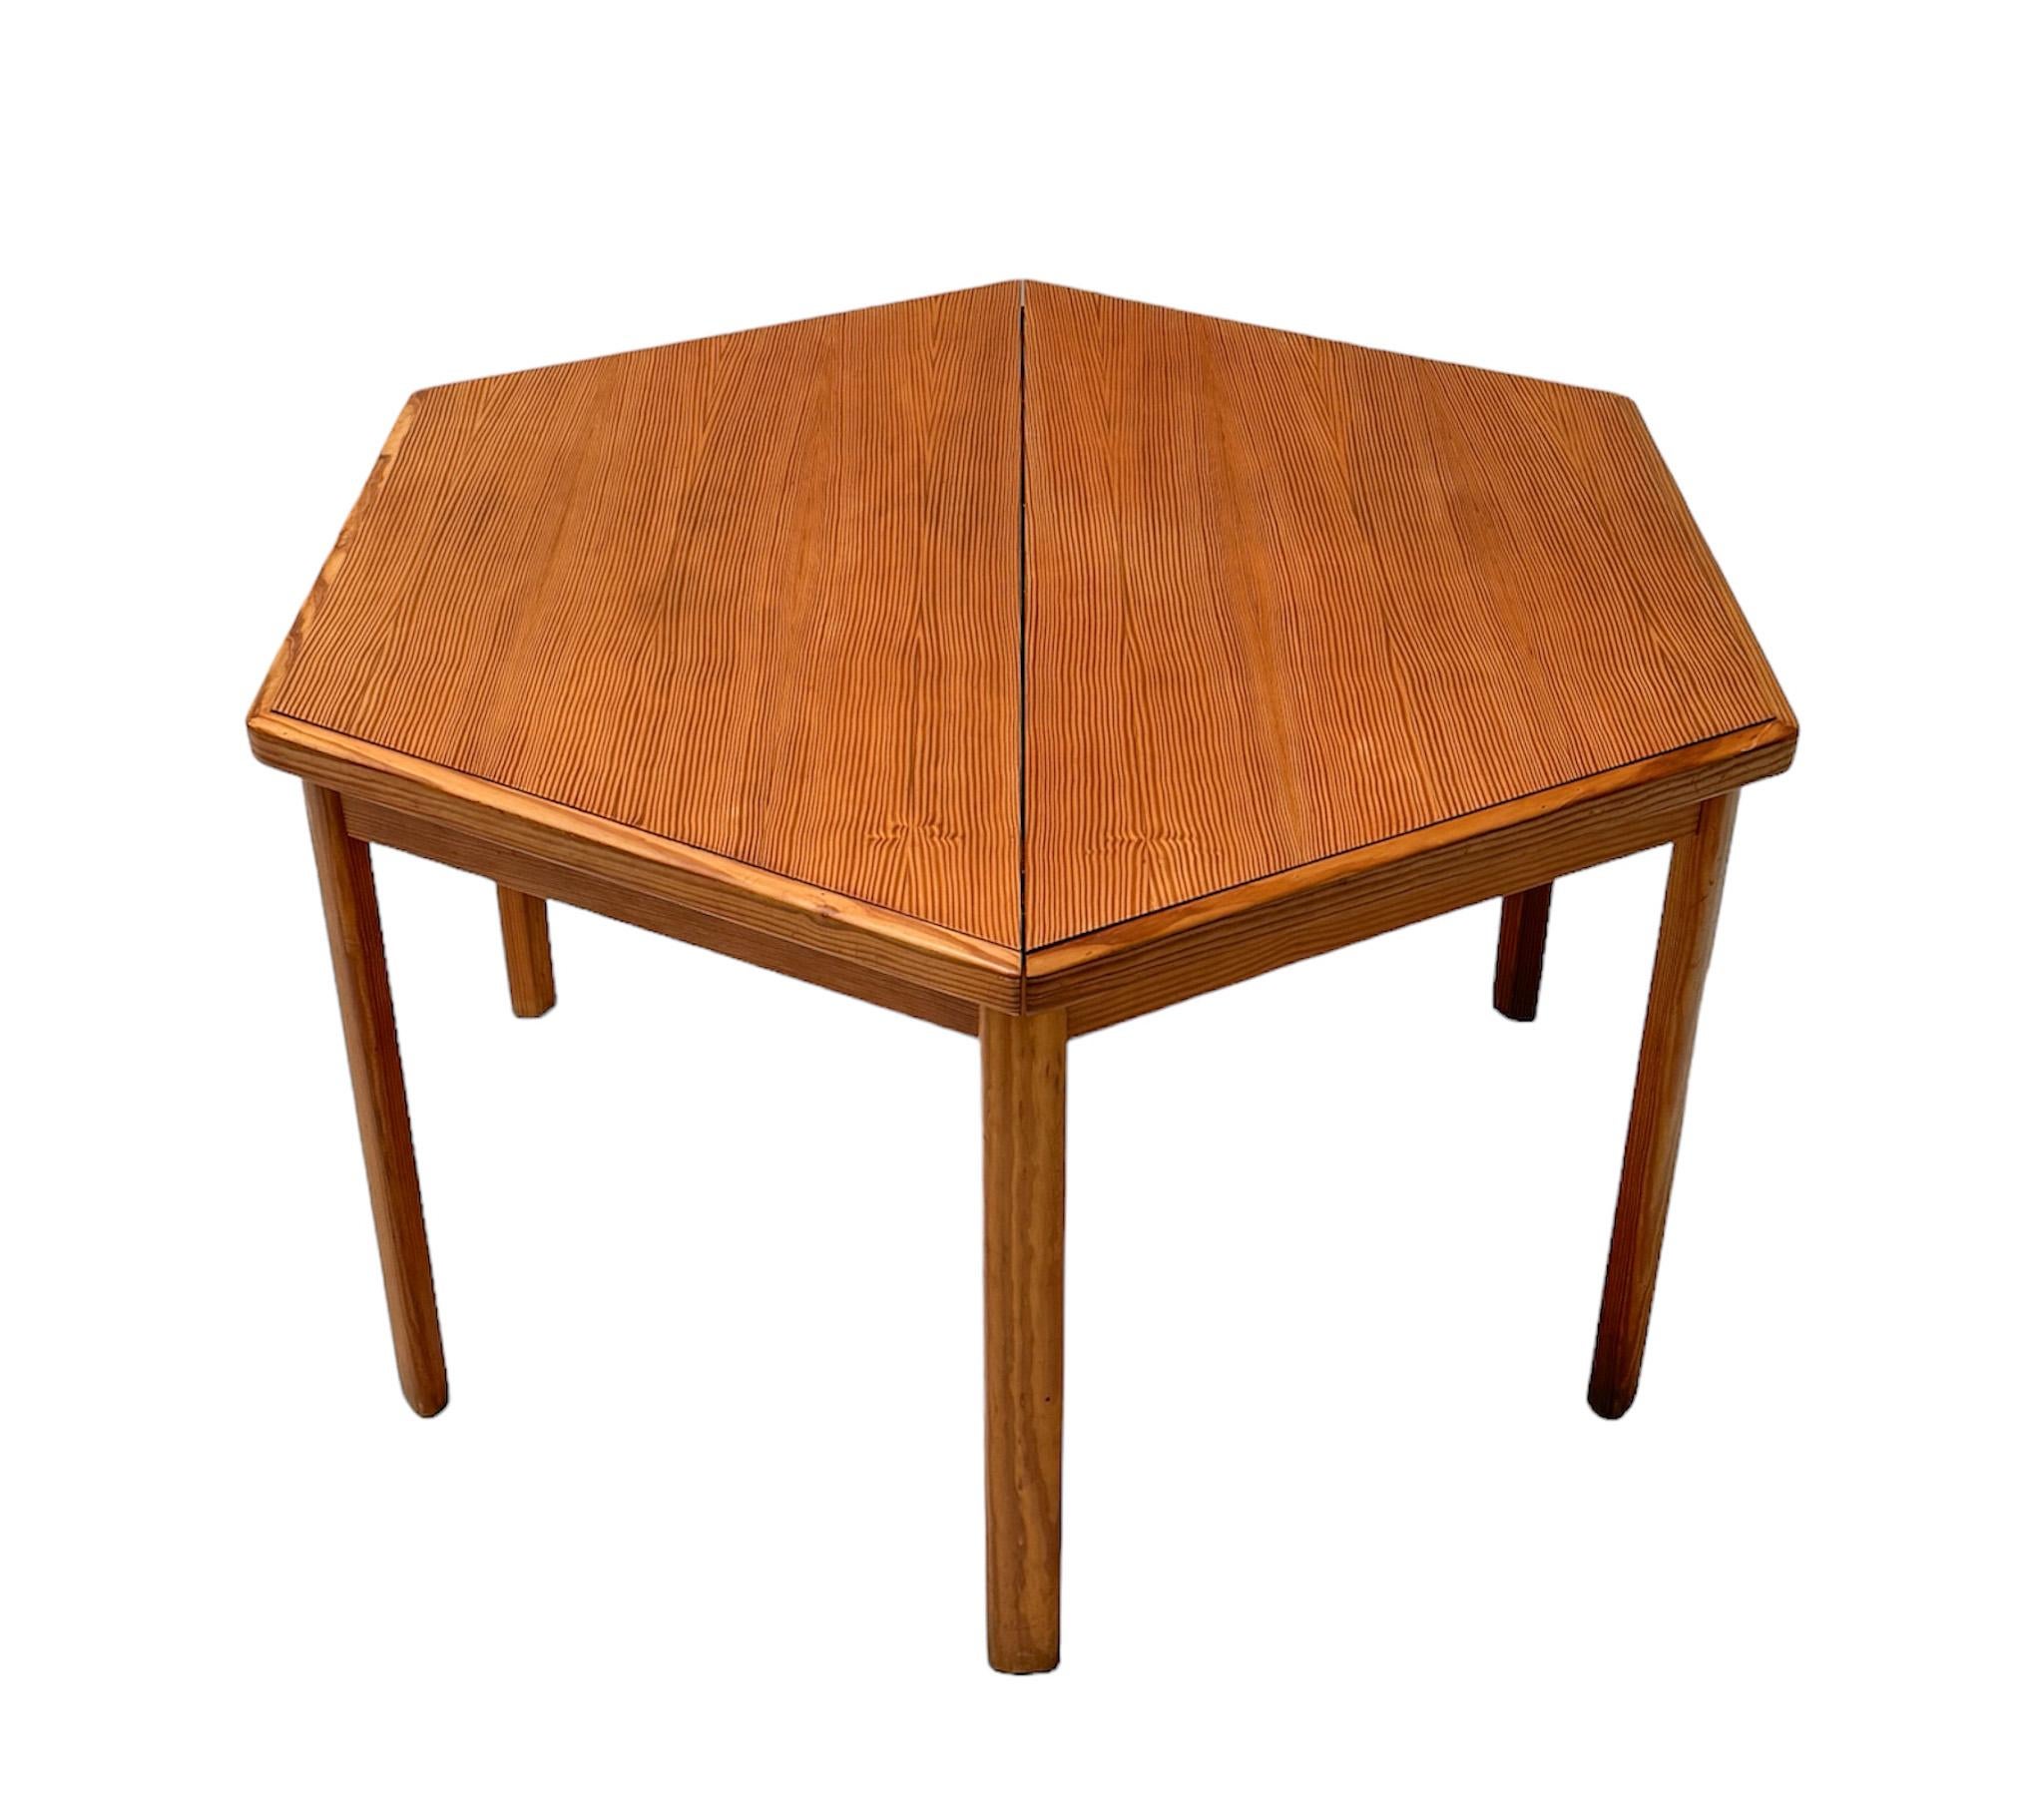 French Pine Mid-Century Modern Extendable Dining Room Table, 1970s For Sale 4